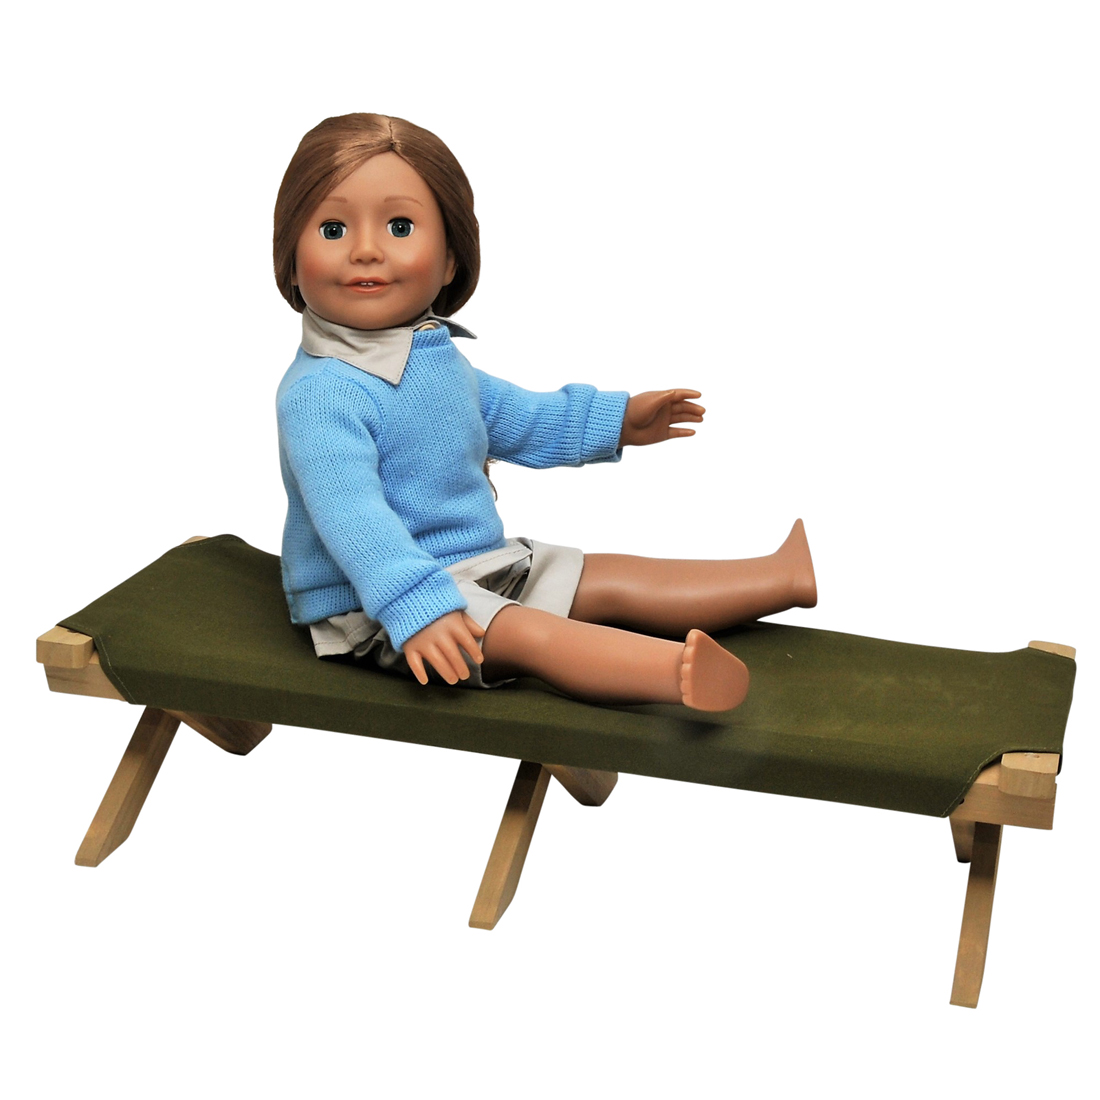 American Camping Adventure 18 inch doll 